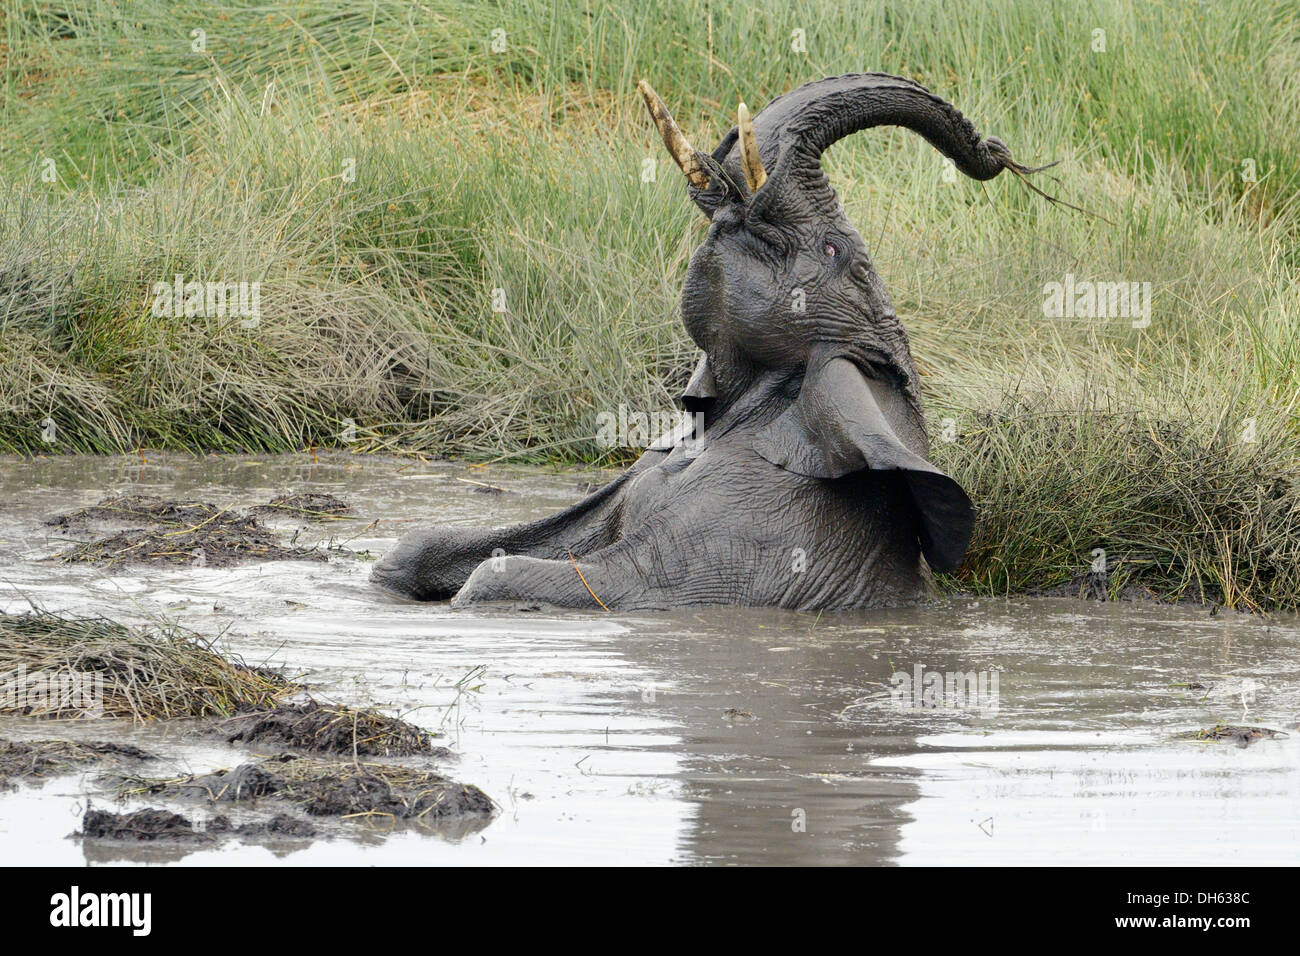 Young elephant playing in a water pool. Stock Photo